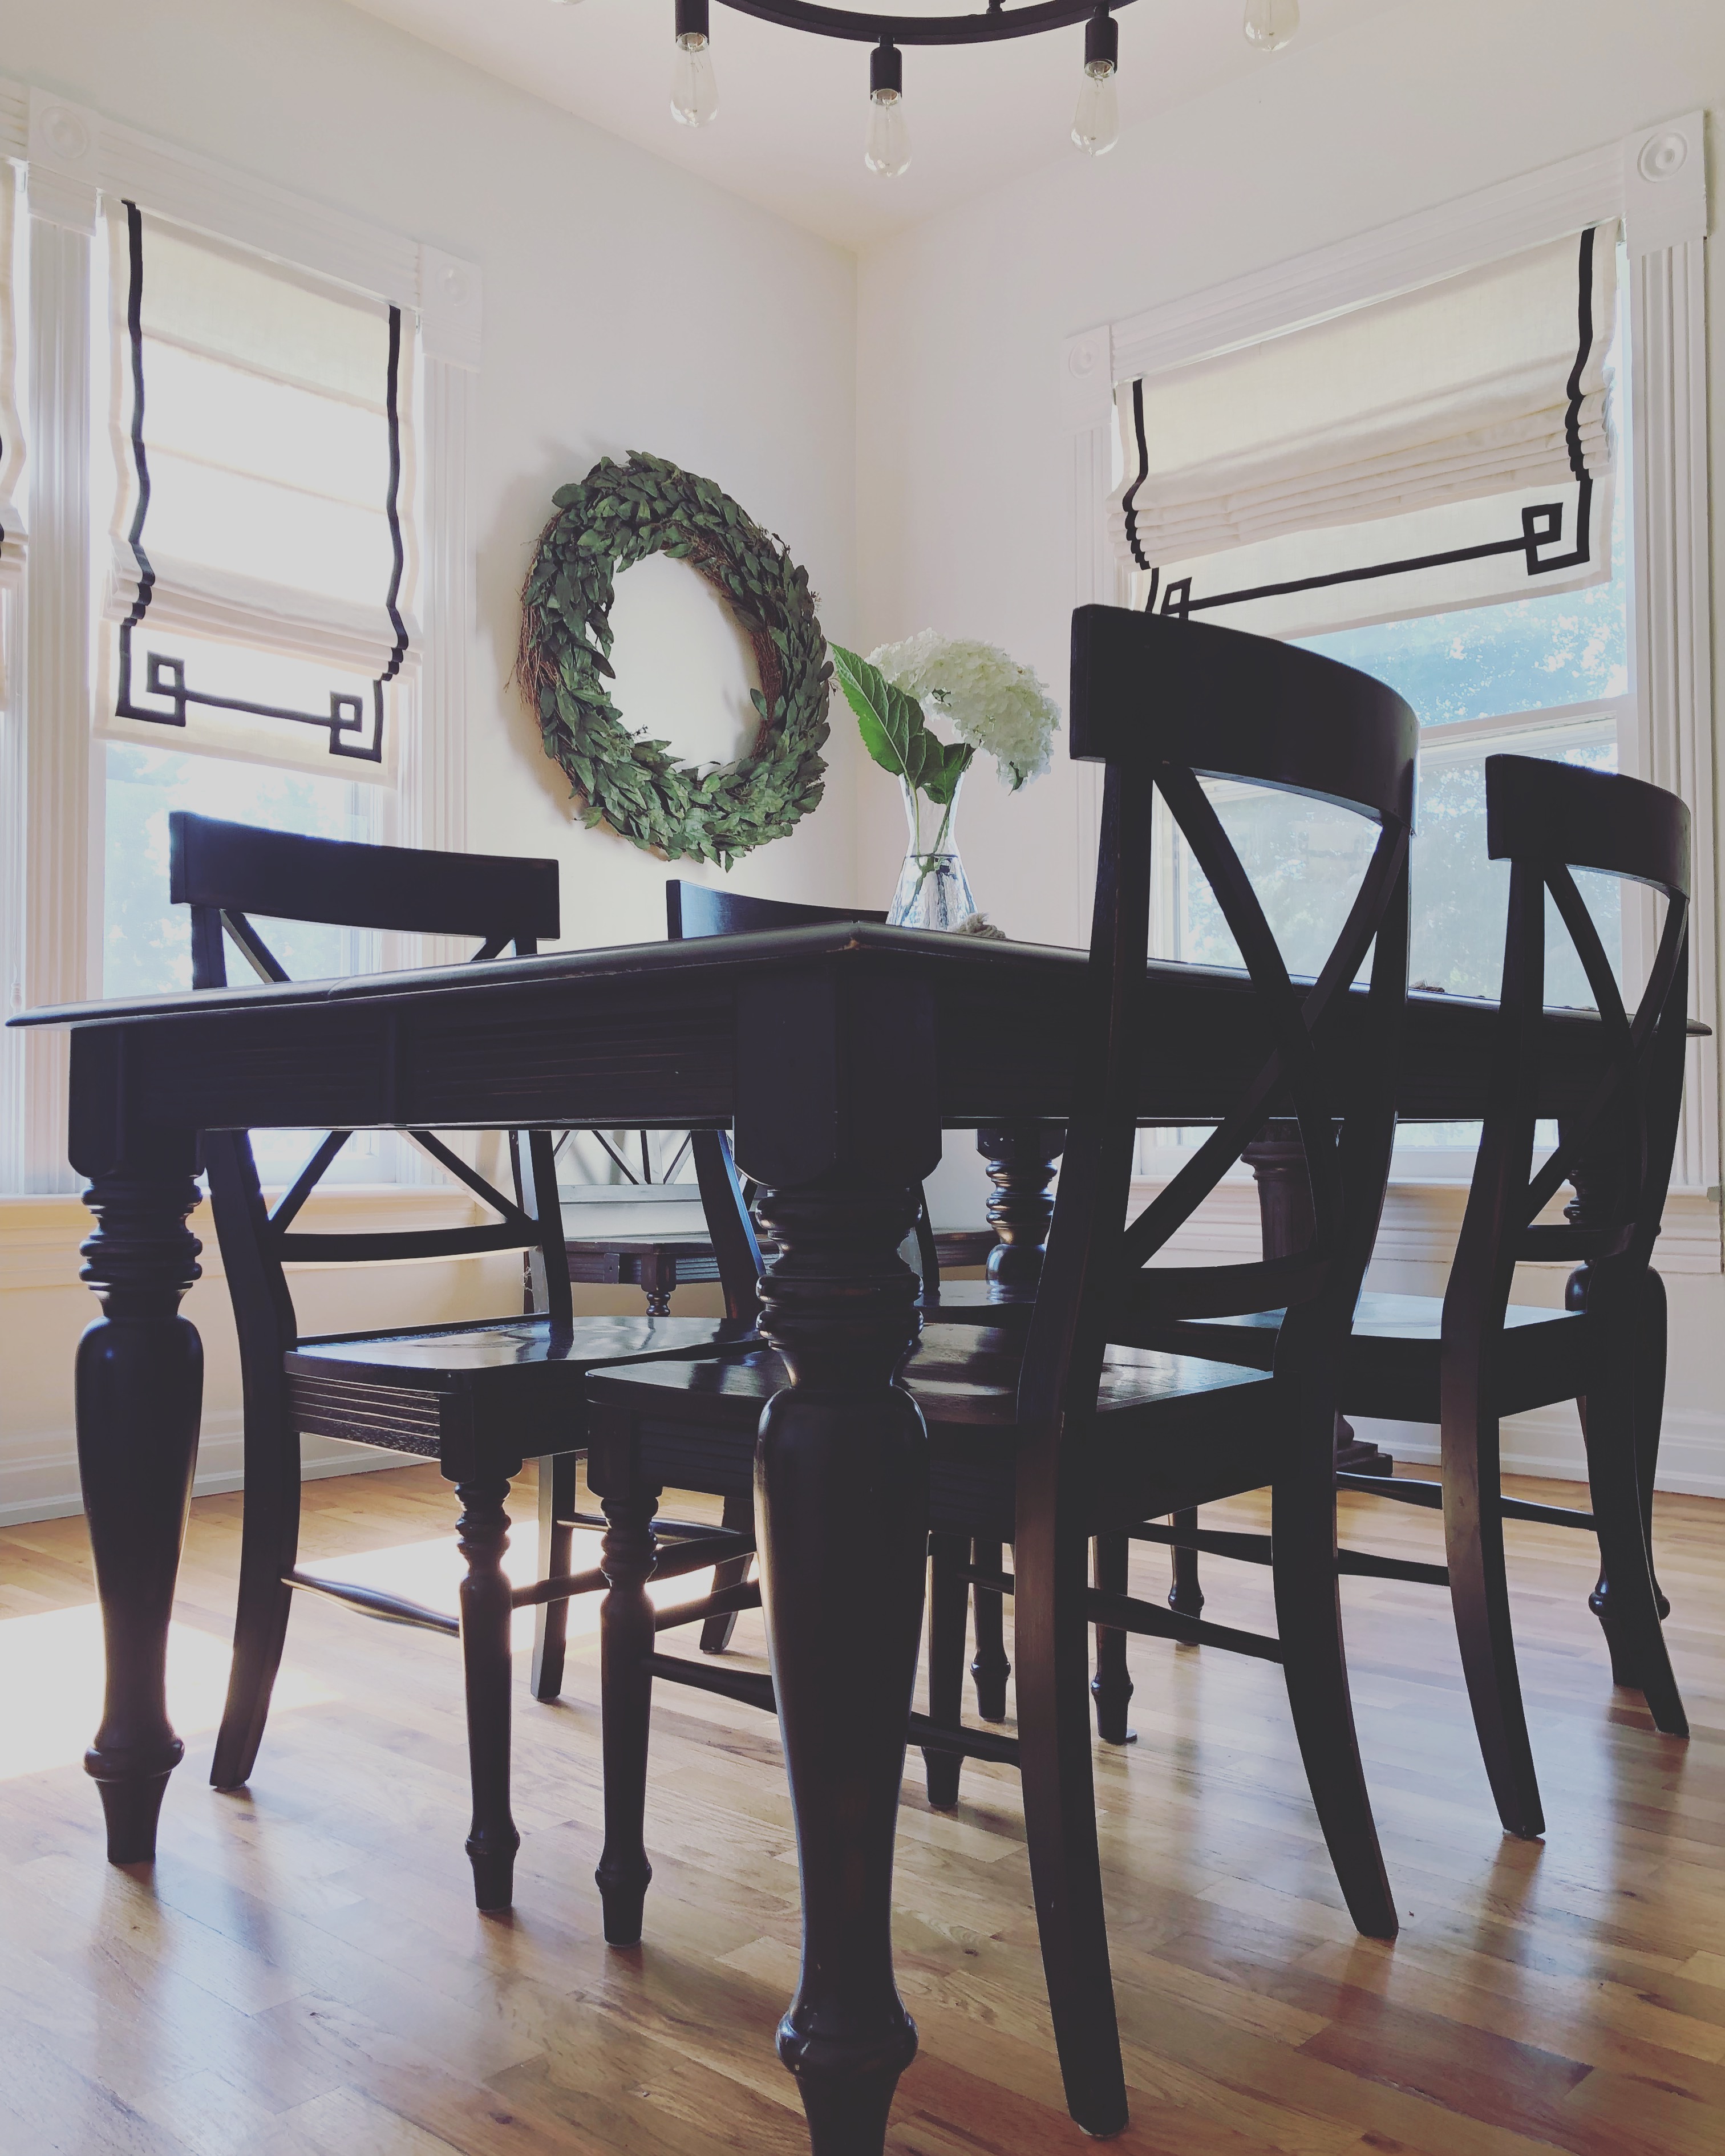 6 Tips on How to Find BEAUTIFUL Furniture on Craigslist